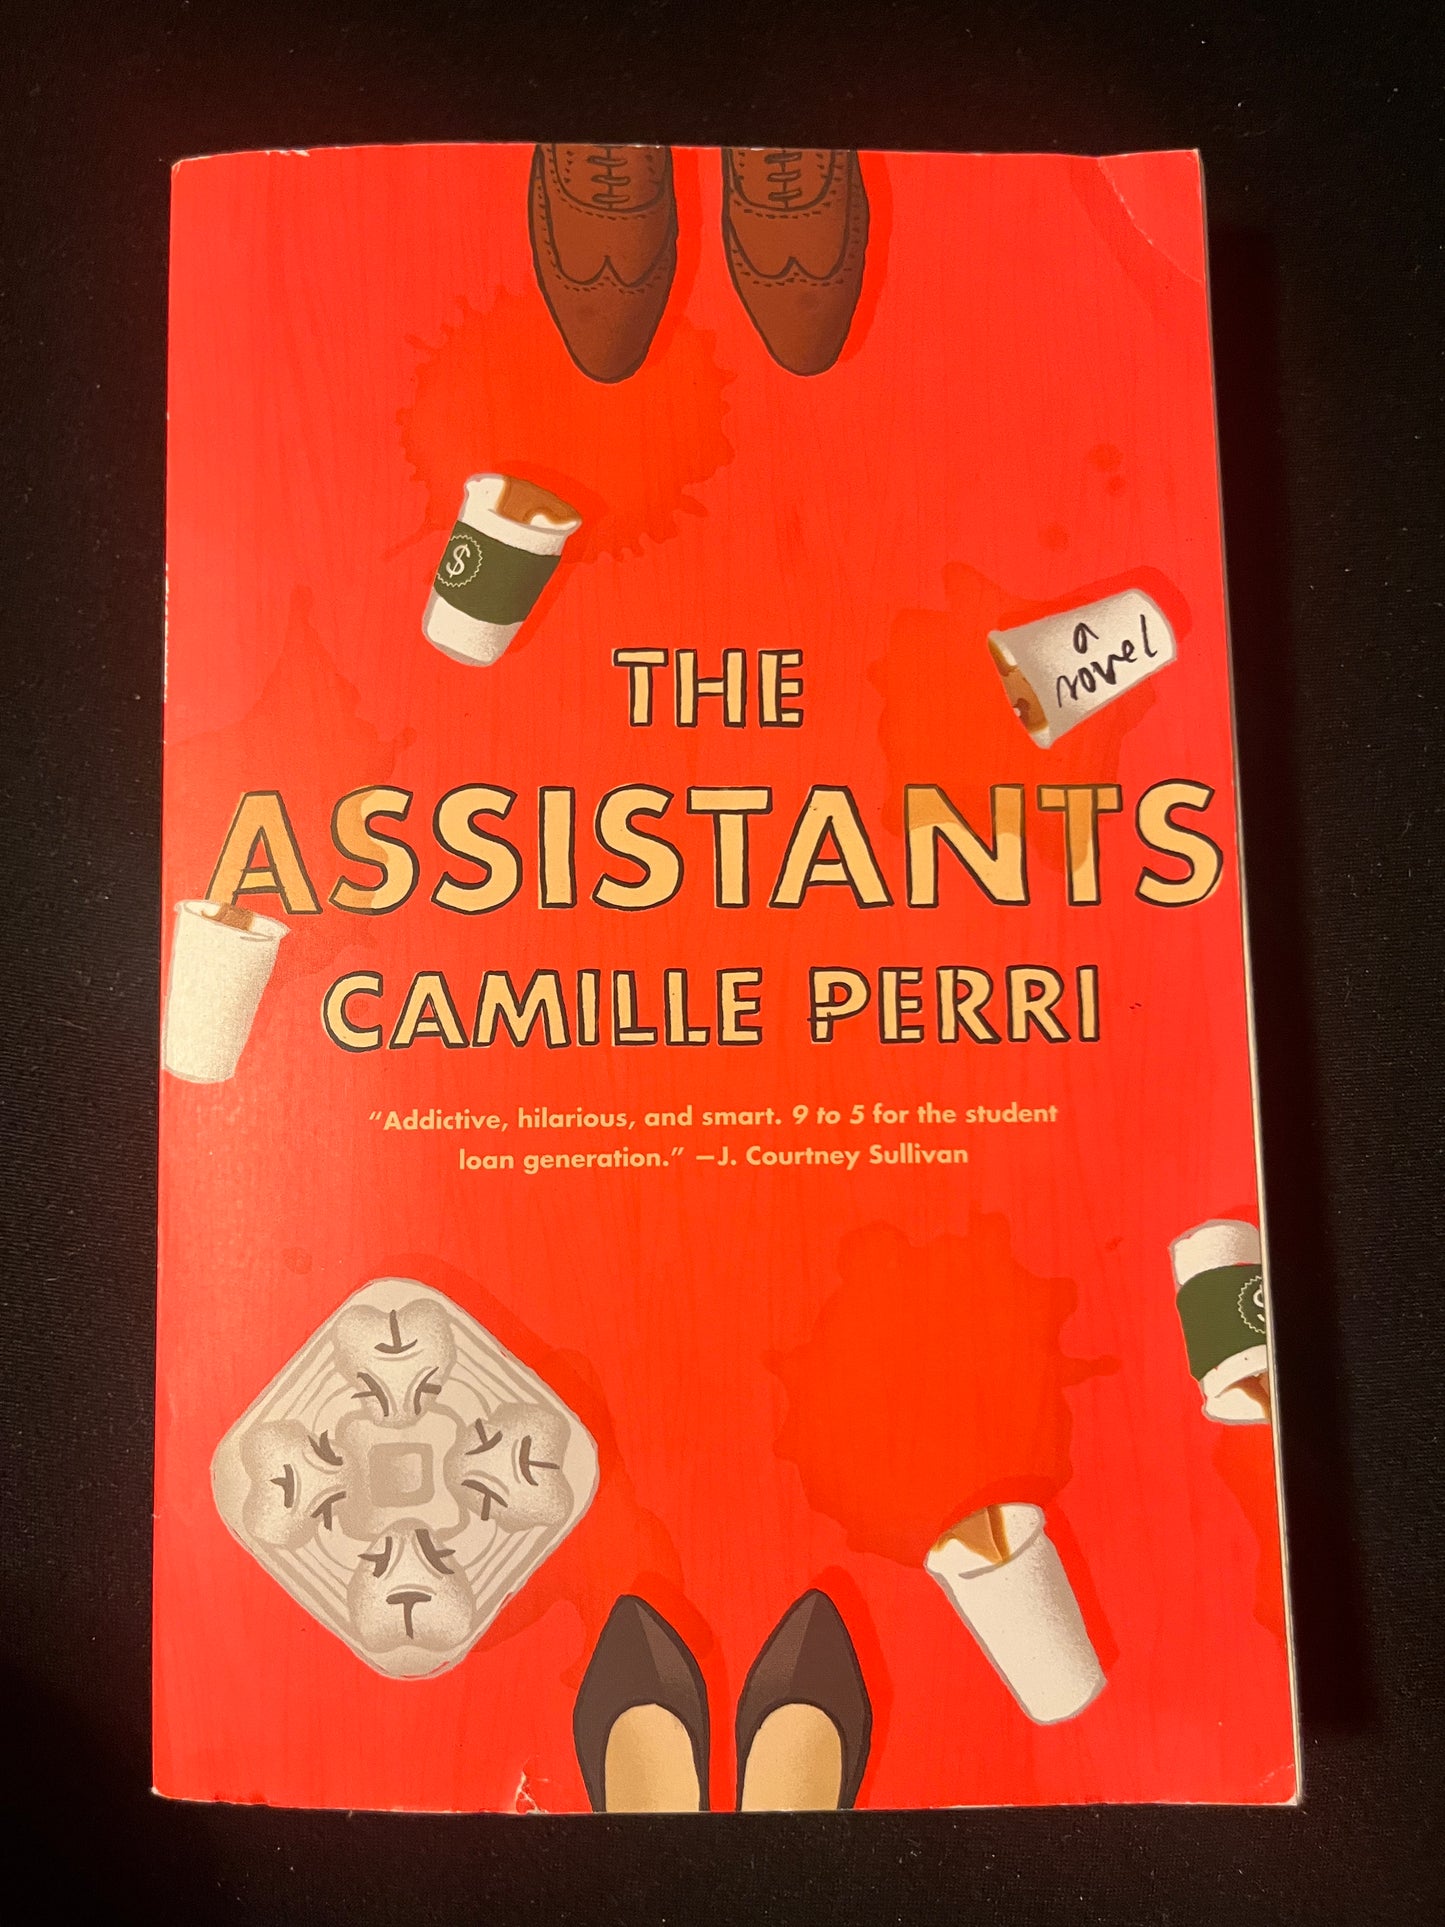 THE ASSISTANTS by Camille Perri